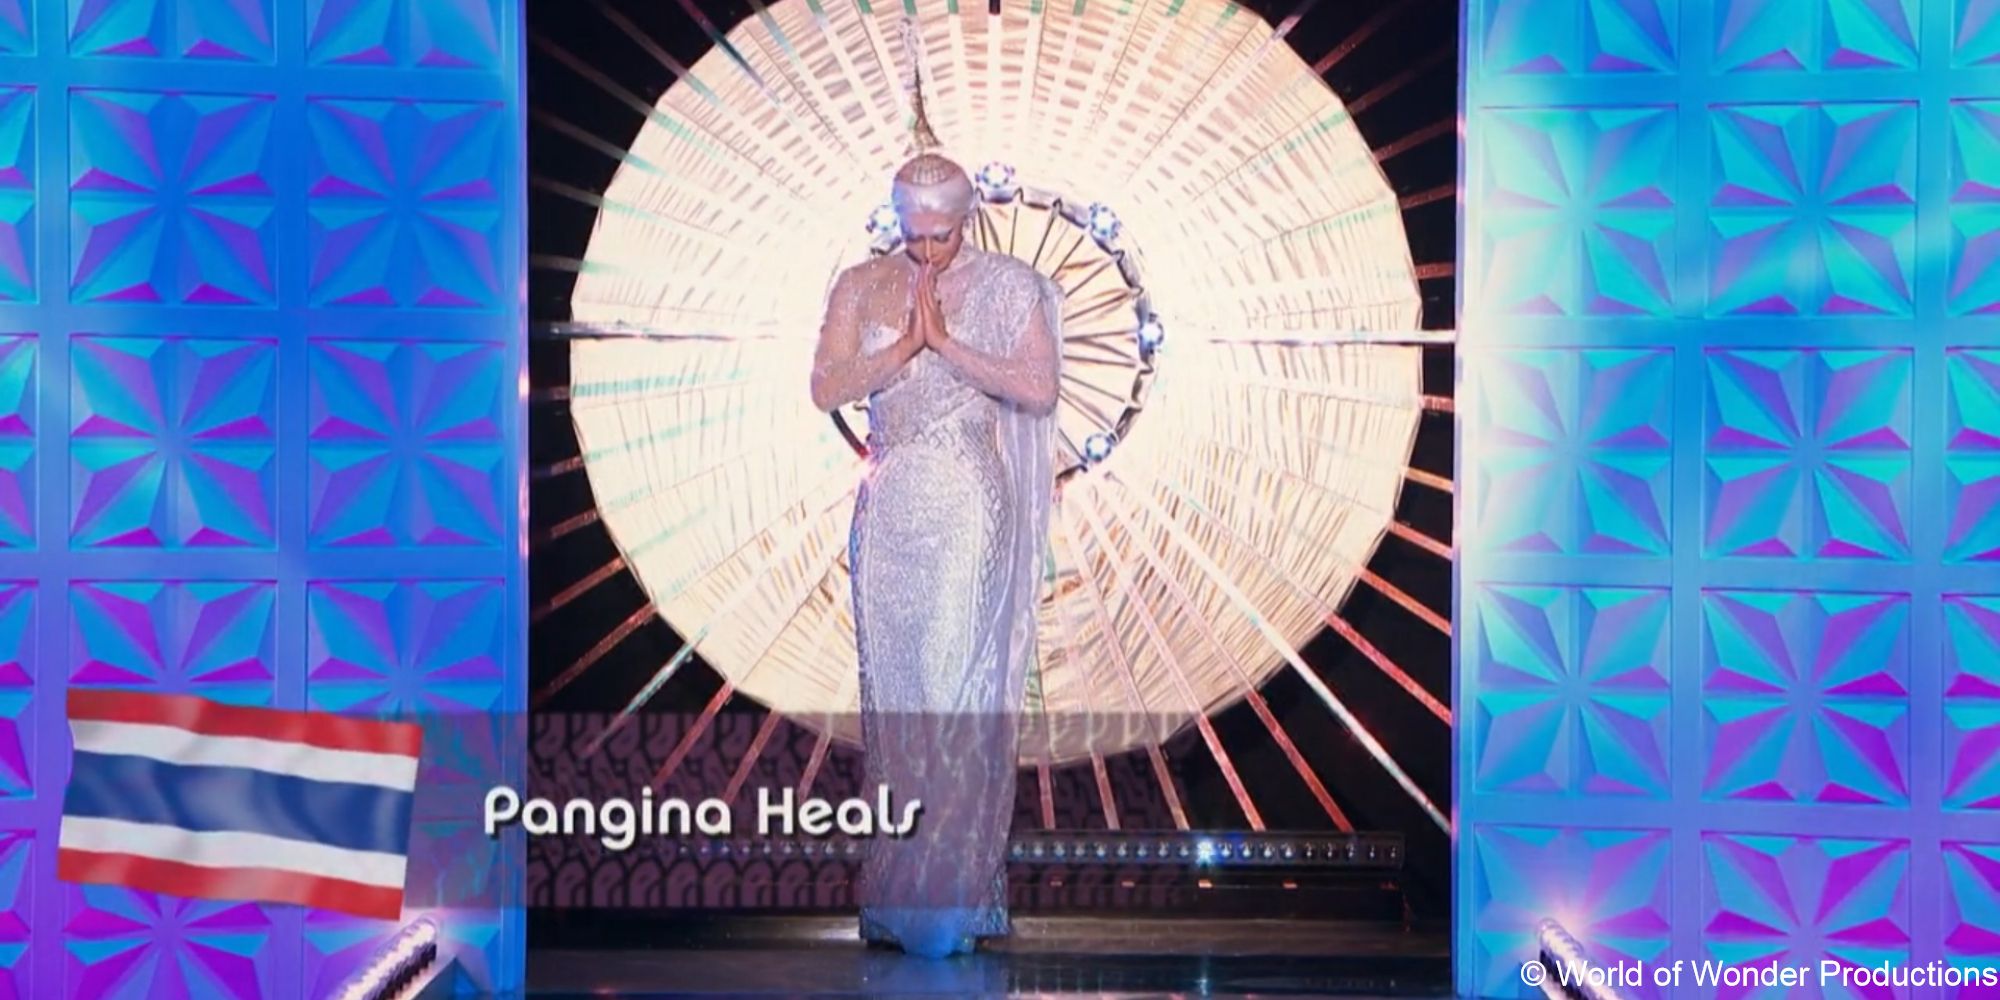 A still of drag queen Pangina Heals wearing a beaded white gown and Thai-inspired headdress, bowing